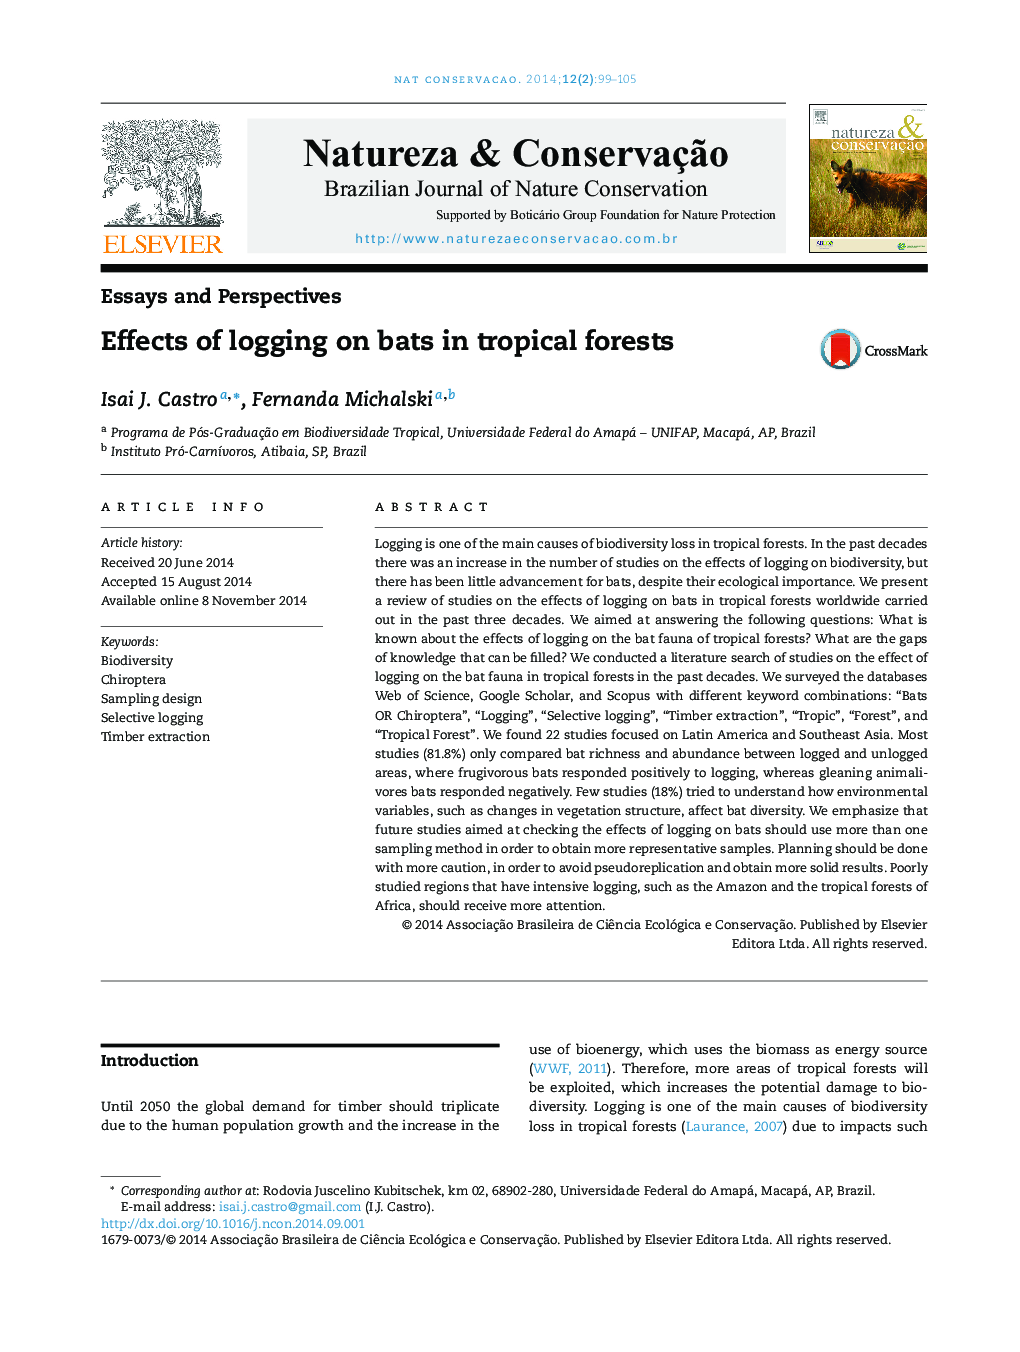 Effects of logging on bats in tropical forests